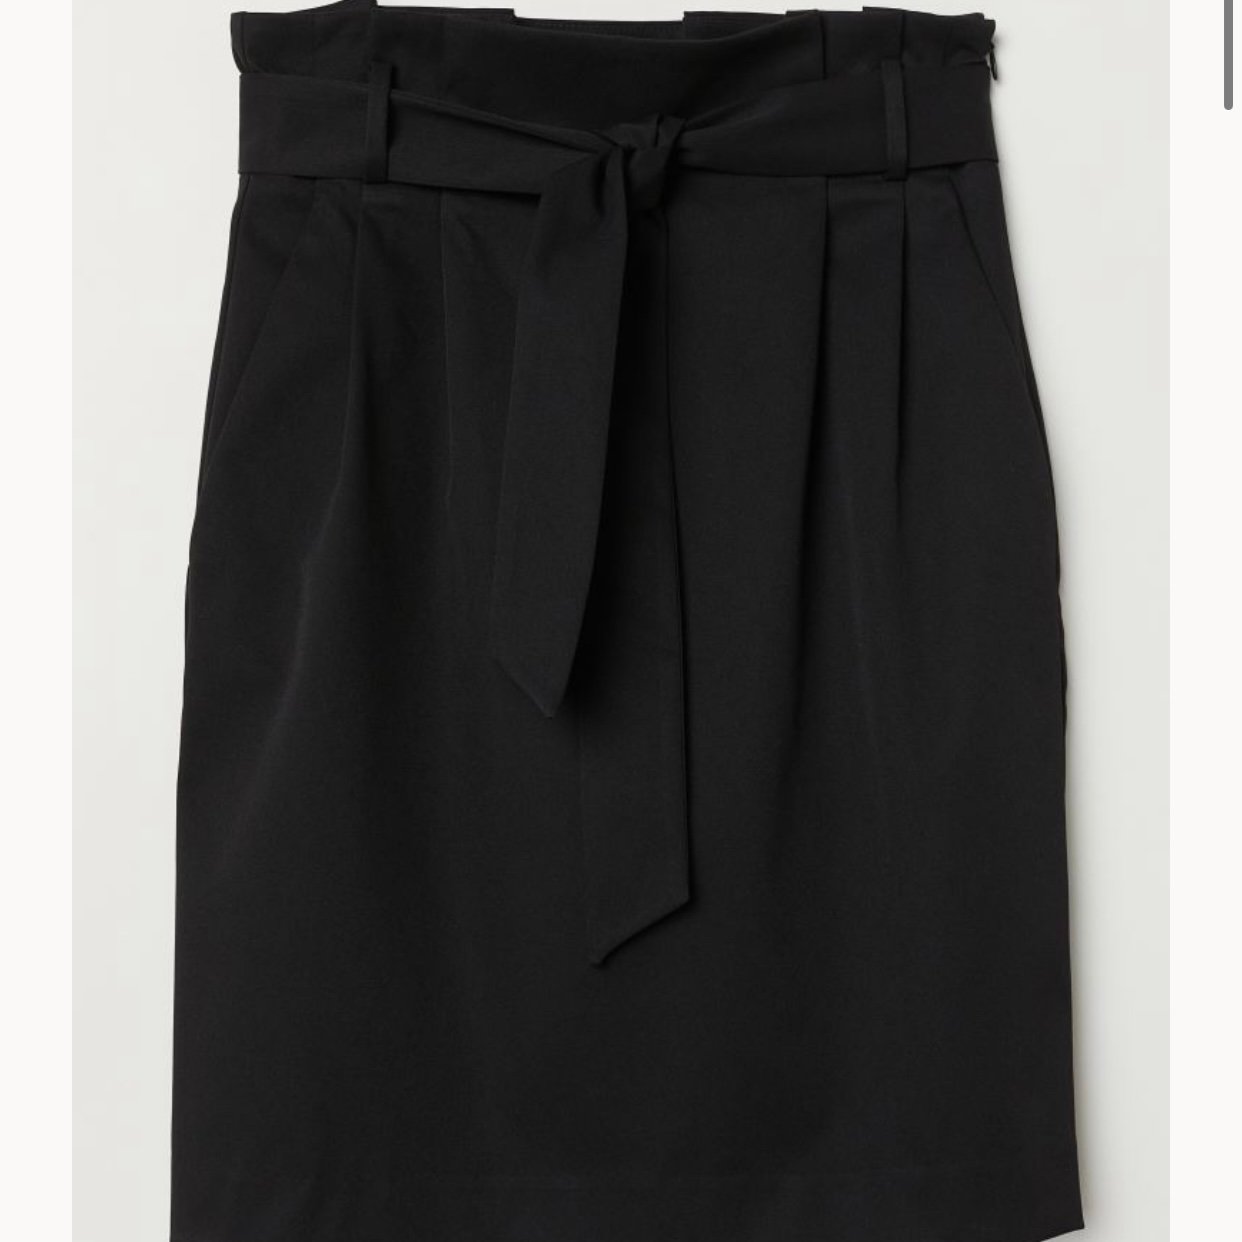 high discount H&M Skirt with Tie Belt Straight Pencil H